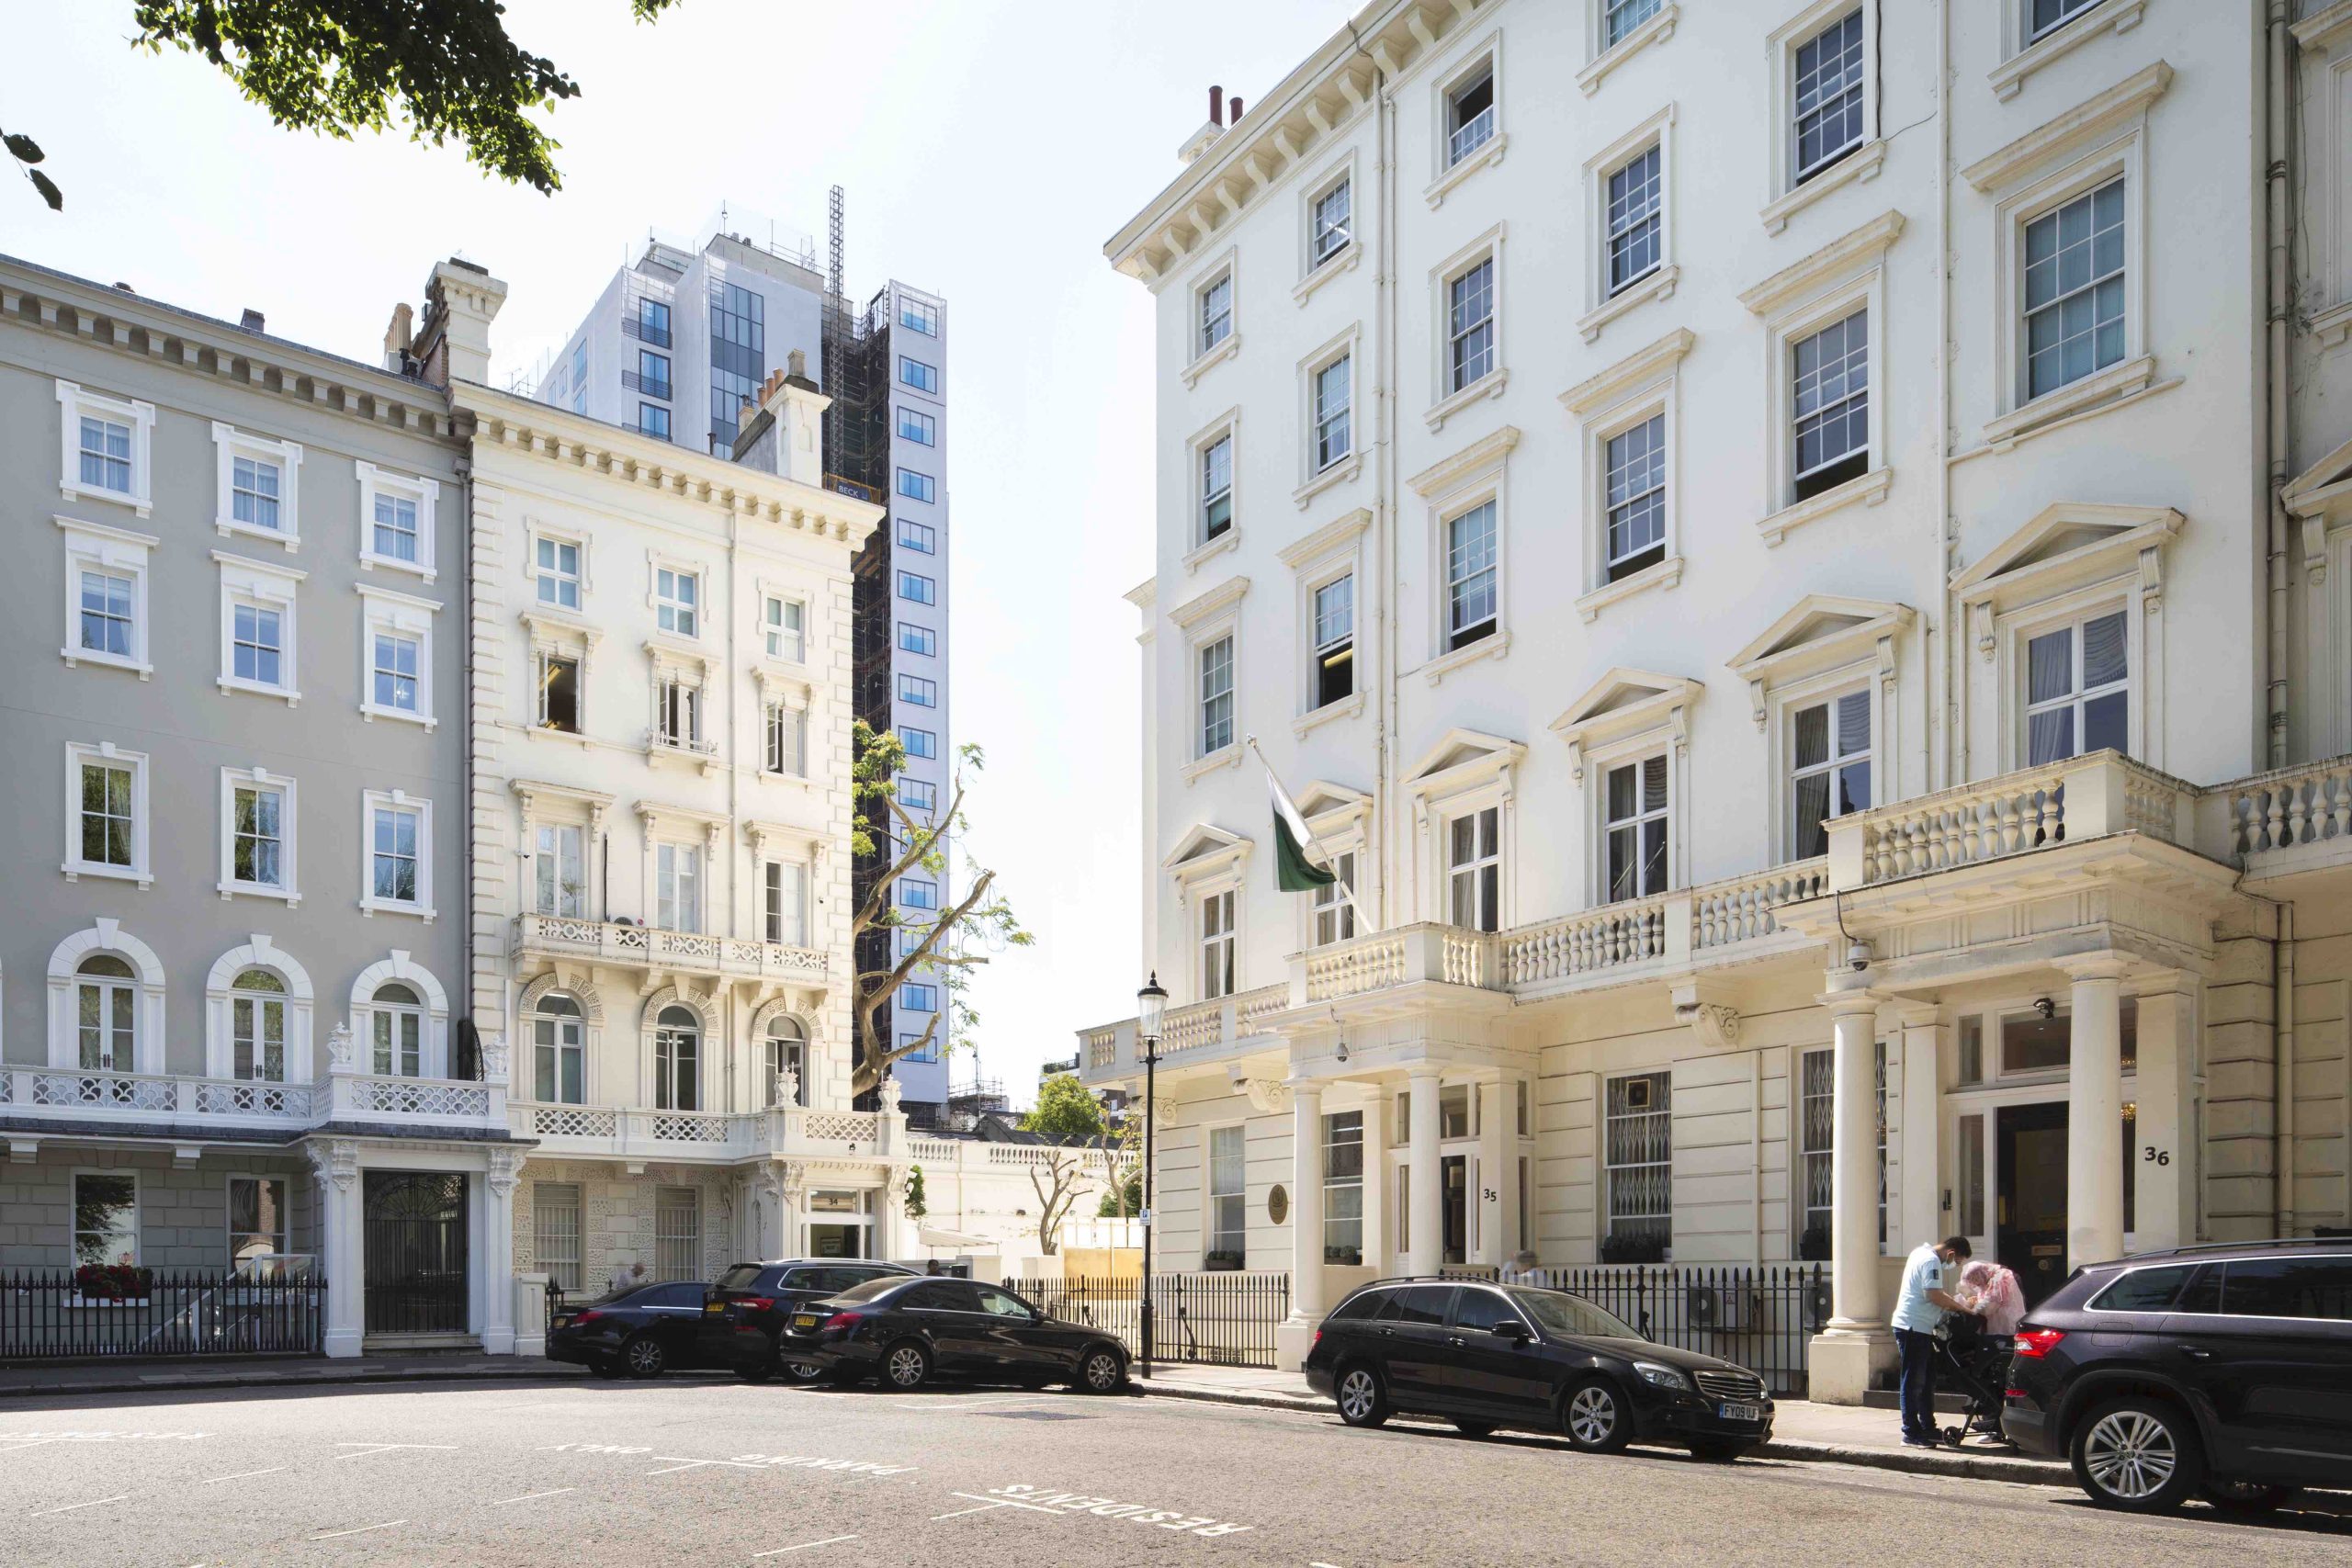 99 Structural Engineers have experience advising Senior Diplomats on the upkeep of their embassy buildings in Kensington and Chelsea